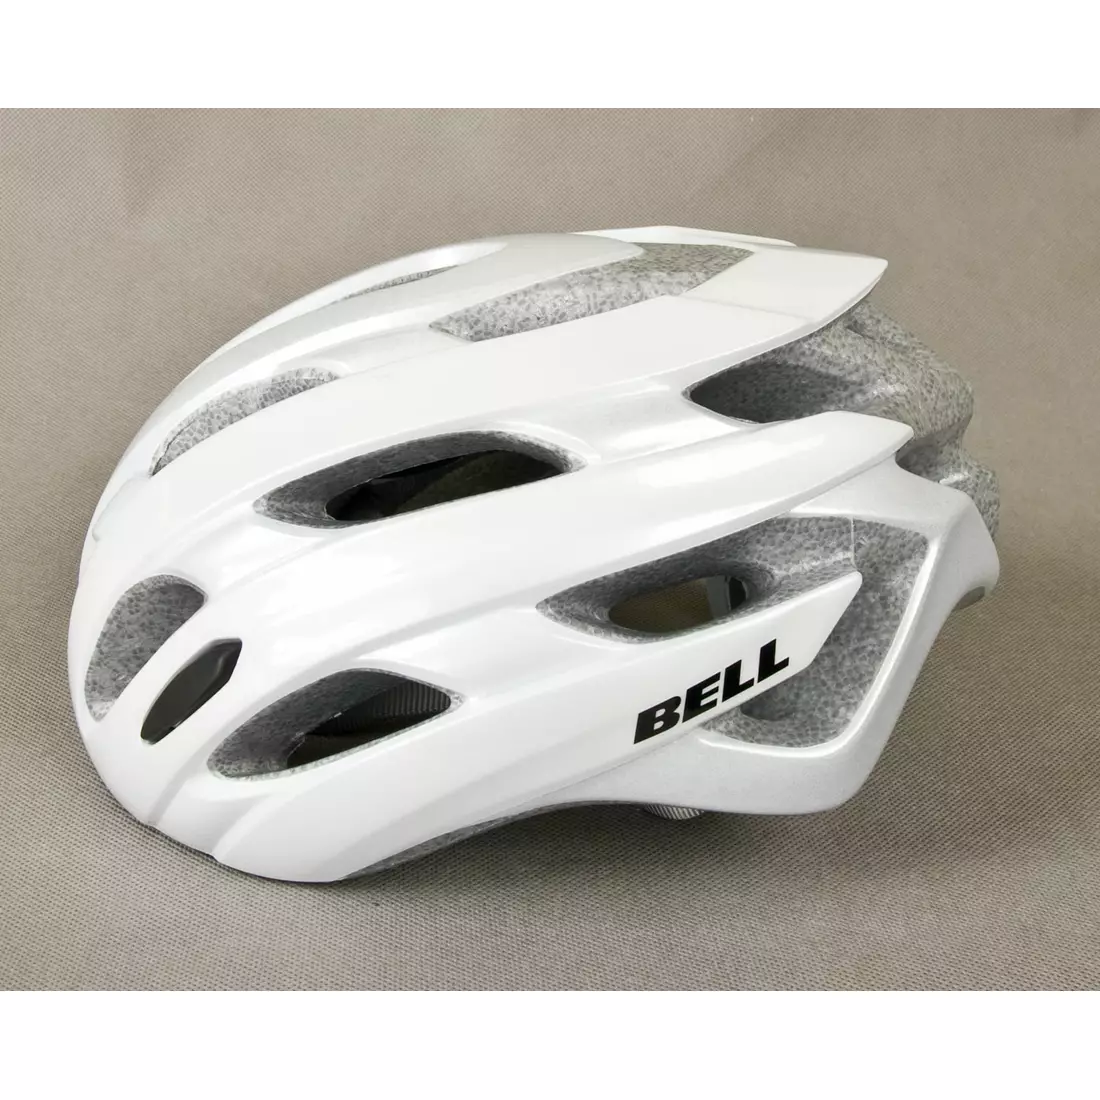 BELL EVENT bicycle helmet, white